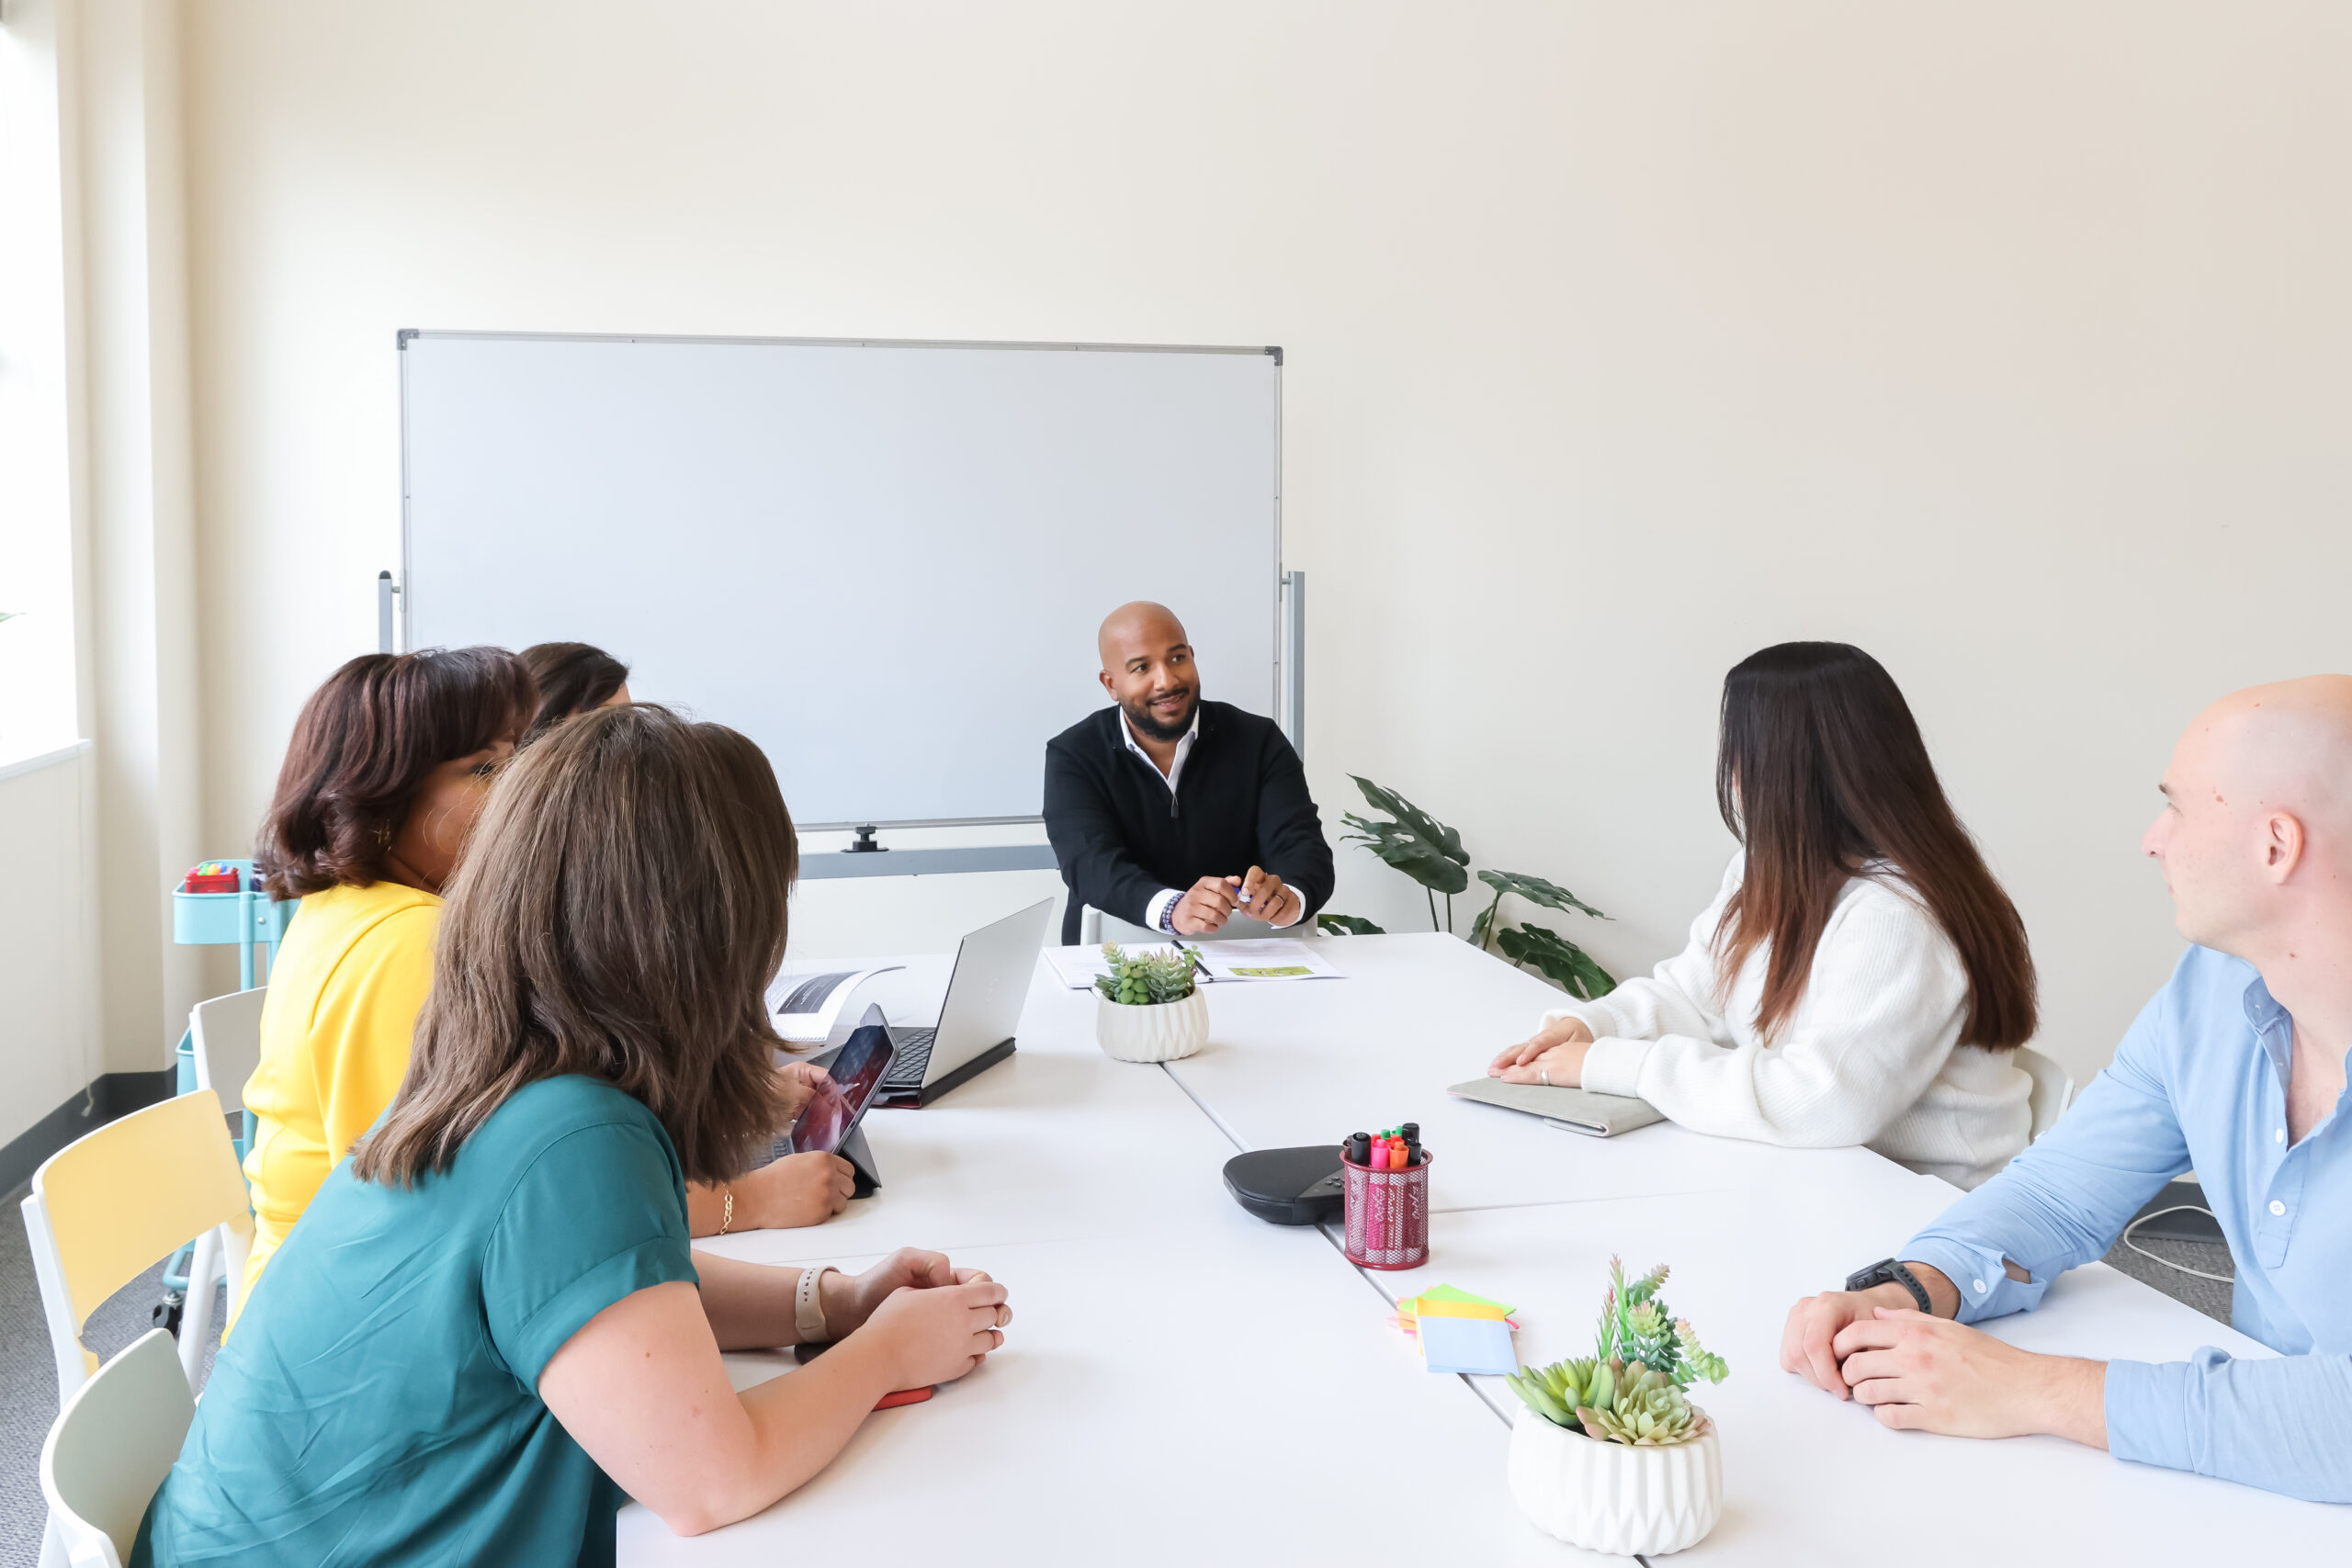 6 people sitting around a desk, in a professional setting. Everyone is looking at the speaker who is sitting in front of a white board,